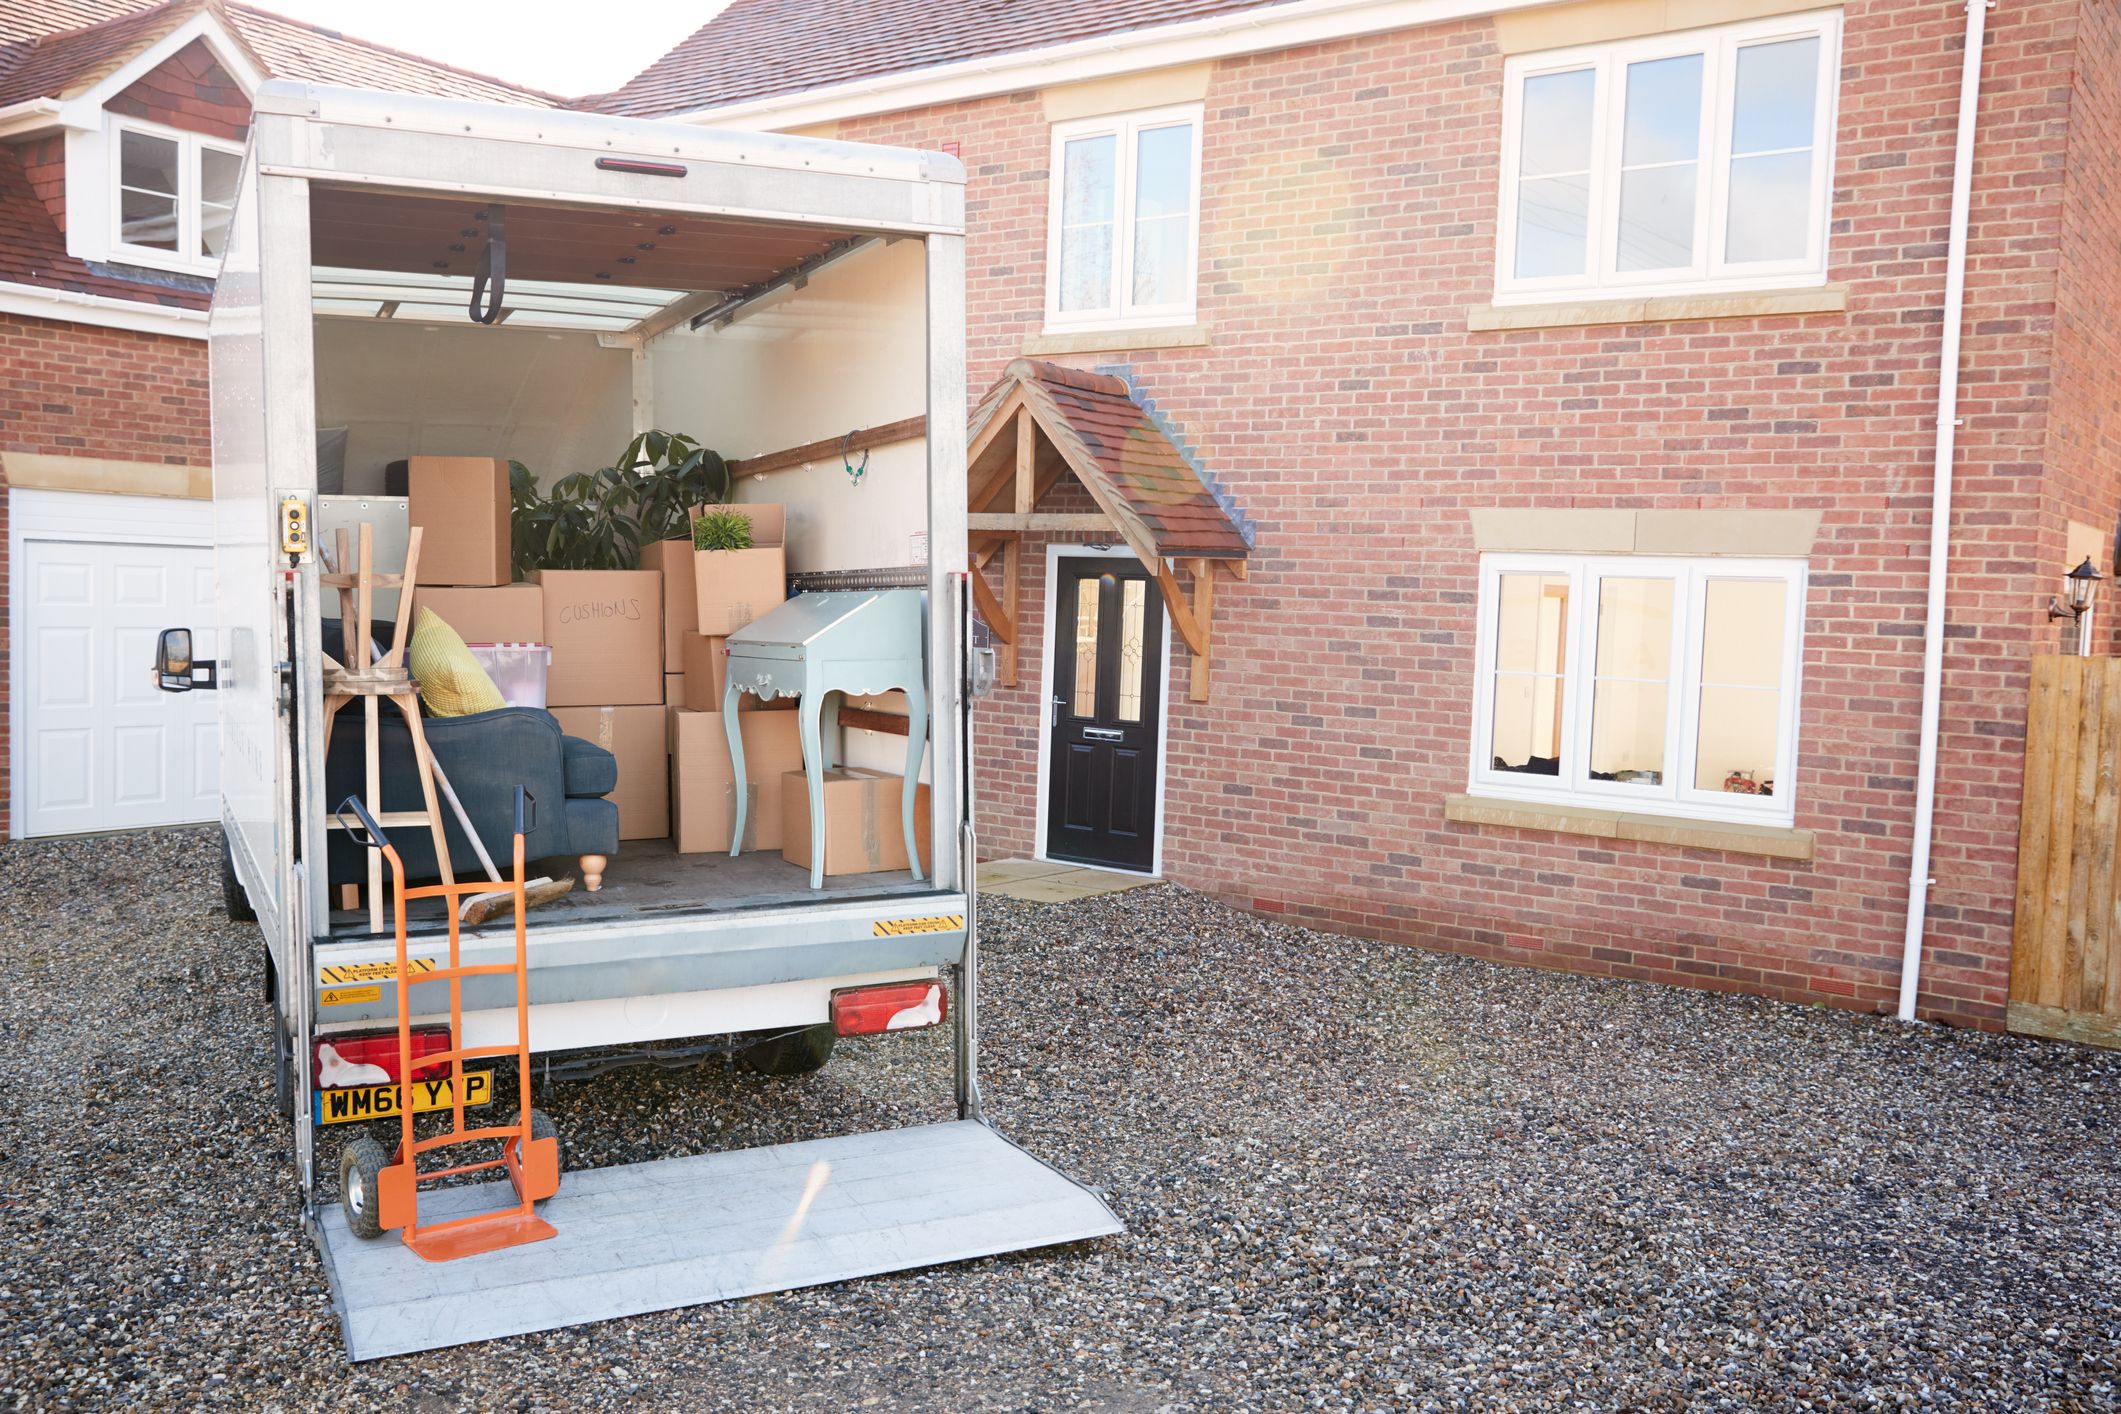 How To Pack And Load A House Removal Truck - MnM Removals